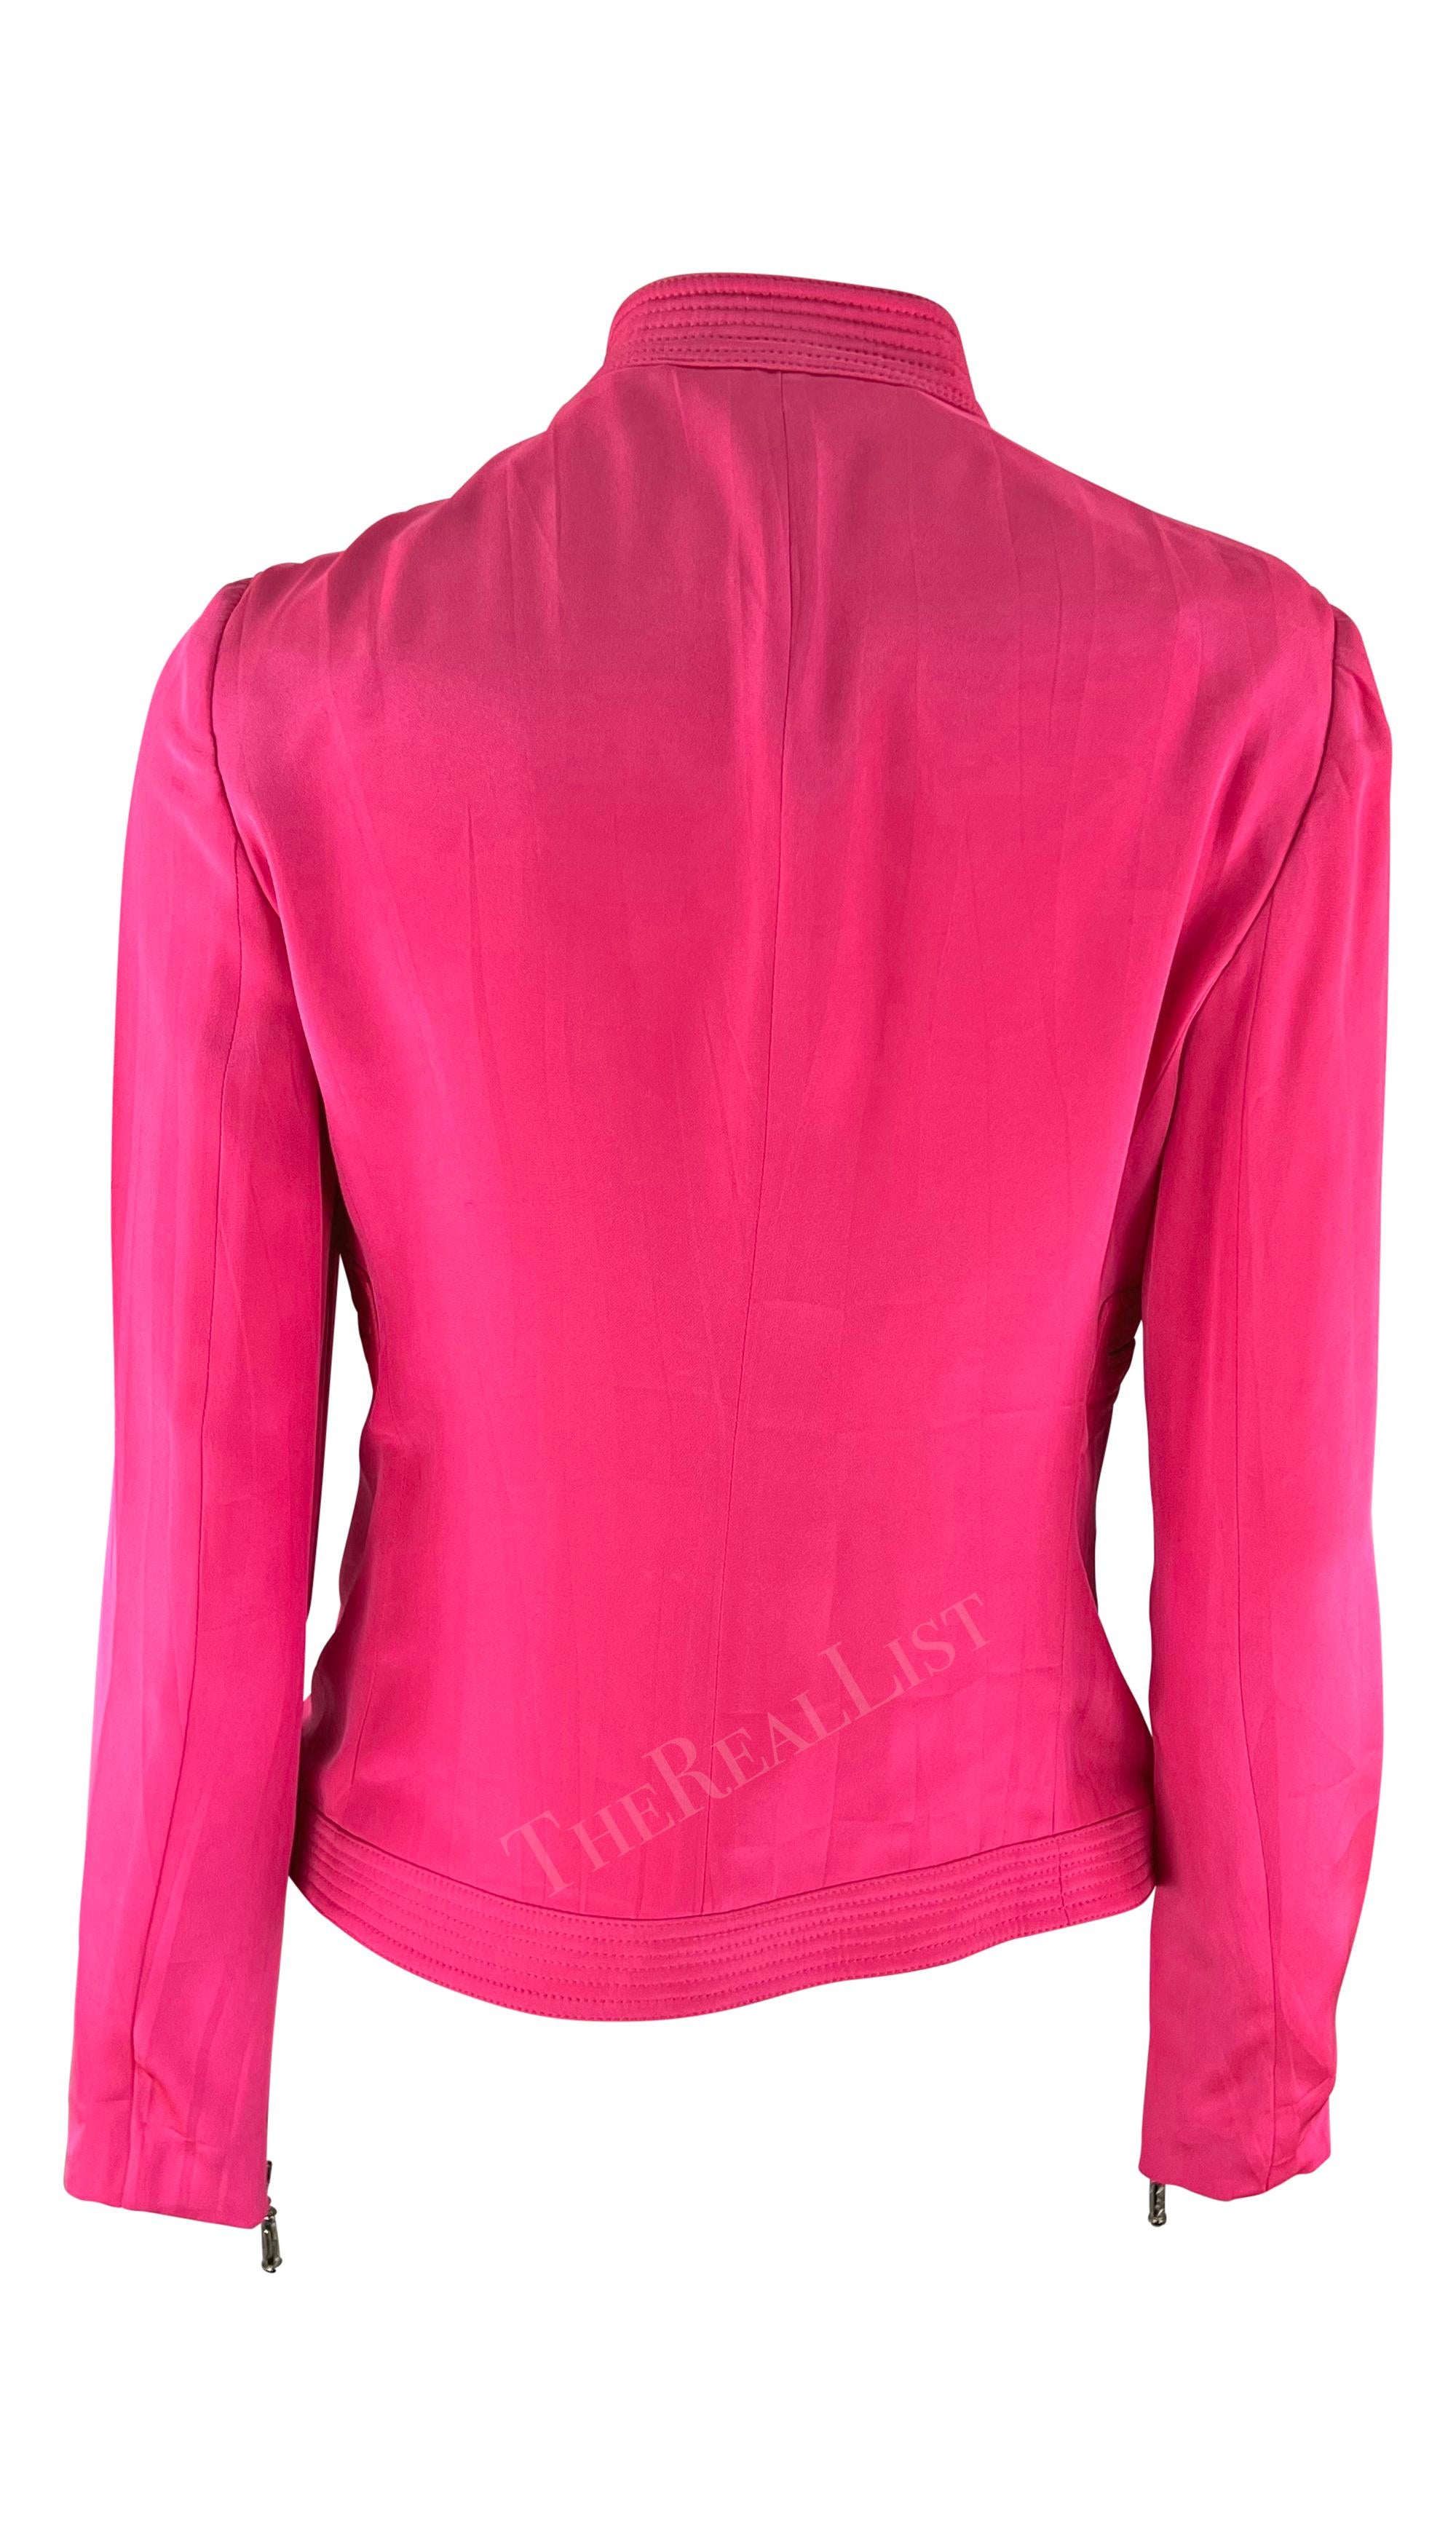 S/S 2003 Gianni Versace by Donatella Runway Hot Pink Long Sleeve Jacket  For Sale 2